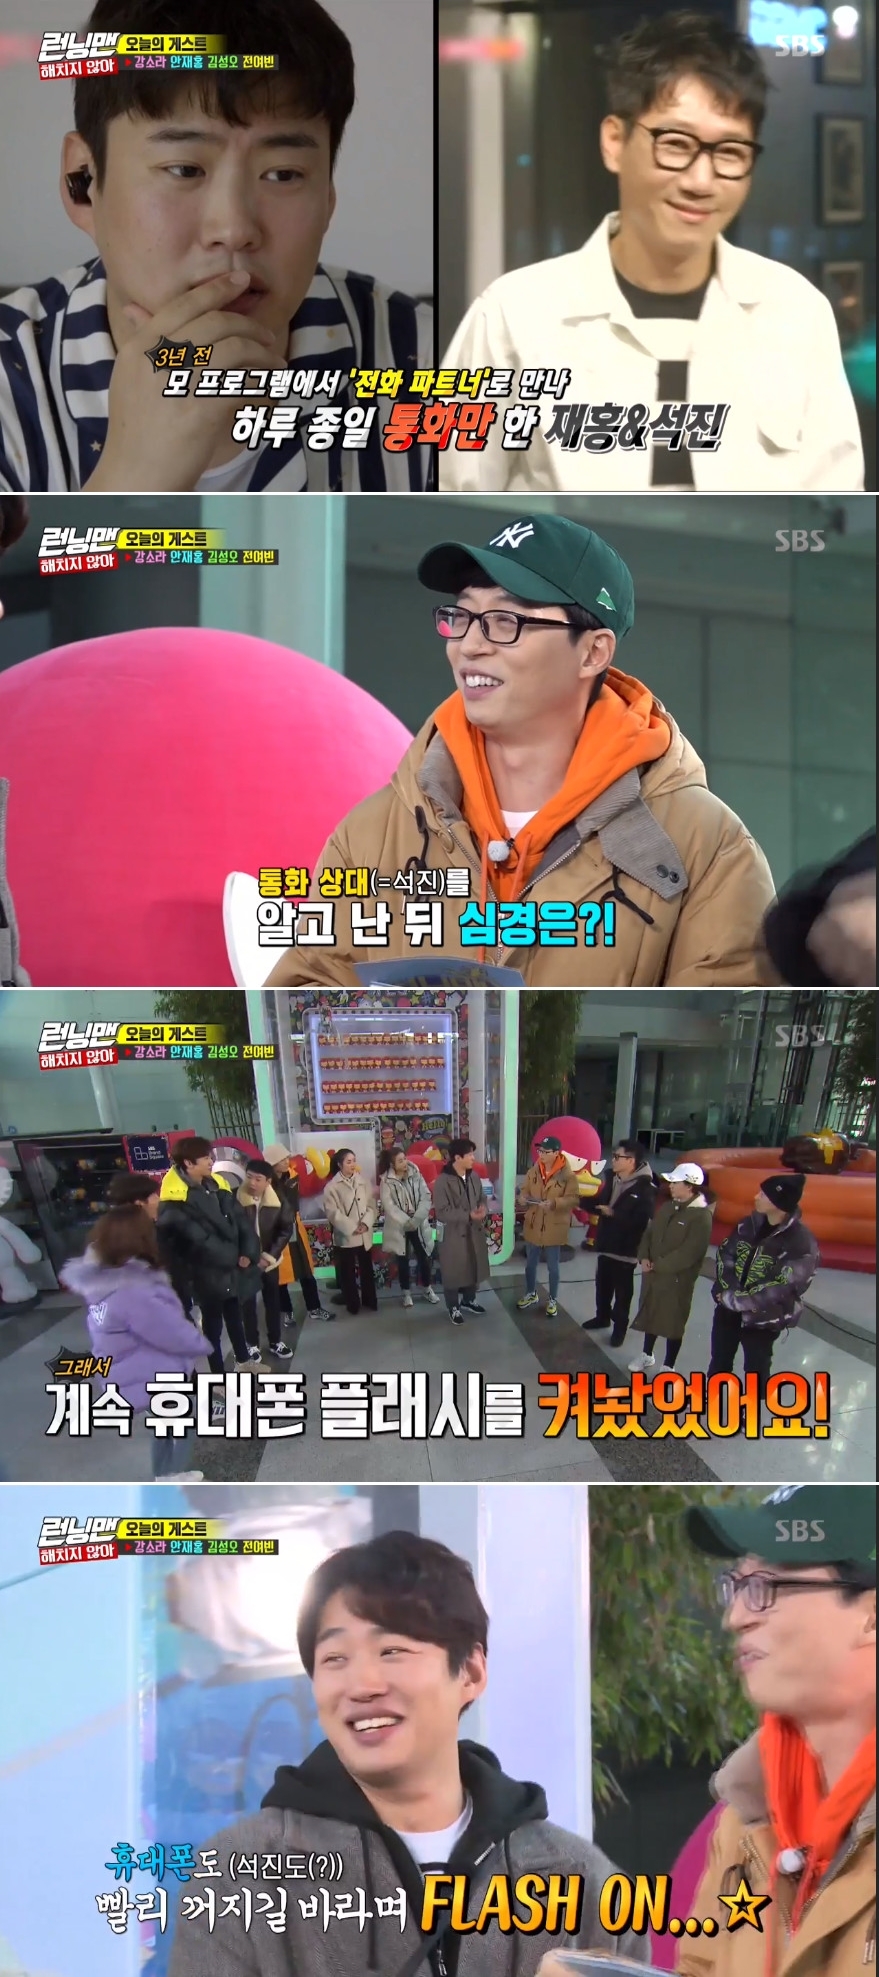 Seoul) = Running Man Ahn Jae-hong has revealed a special meeting with Ji Seok.In SBS Running Man broadcasted on the afternoon of the 12th, the movie Do not Hazard starring Actor Ahn Jae-hong, Jang So-ra, and Kim Sung-oh appeared as guests.On this day, Ahn Jae-hong talked about the story of meeting with Ji Suk-jin as a telephone partner in other programs in the past.Ahn Jae-hong said, When the phone battery turns off, the pass is terminated, so I kept the mobile phone flash on.Ahn Jae-hong surprised everyone by showing leg tearing. Kim Jong-guk, who saw Ahn Jae-hongs leg tear, laughed, saying, In the past, Hong-geumbo was famous for being flexible.